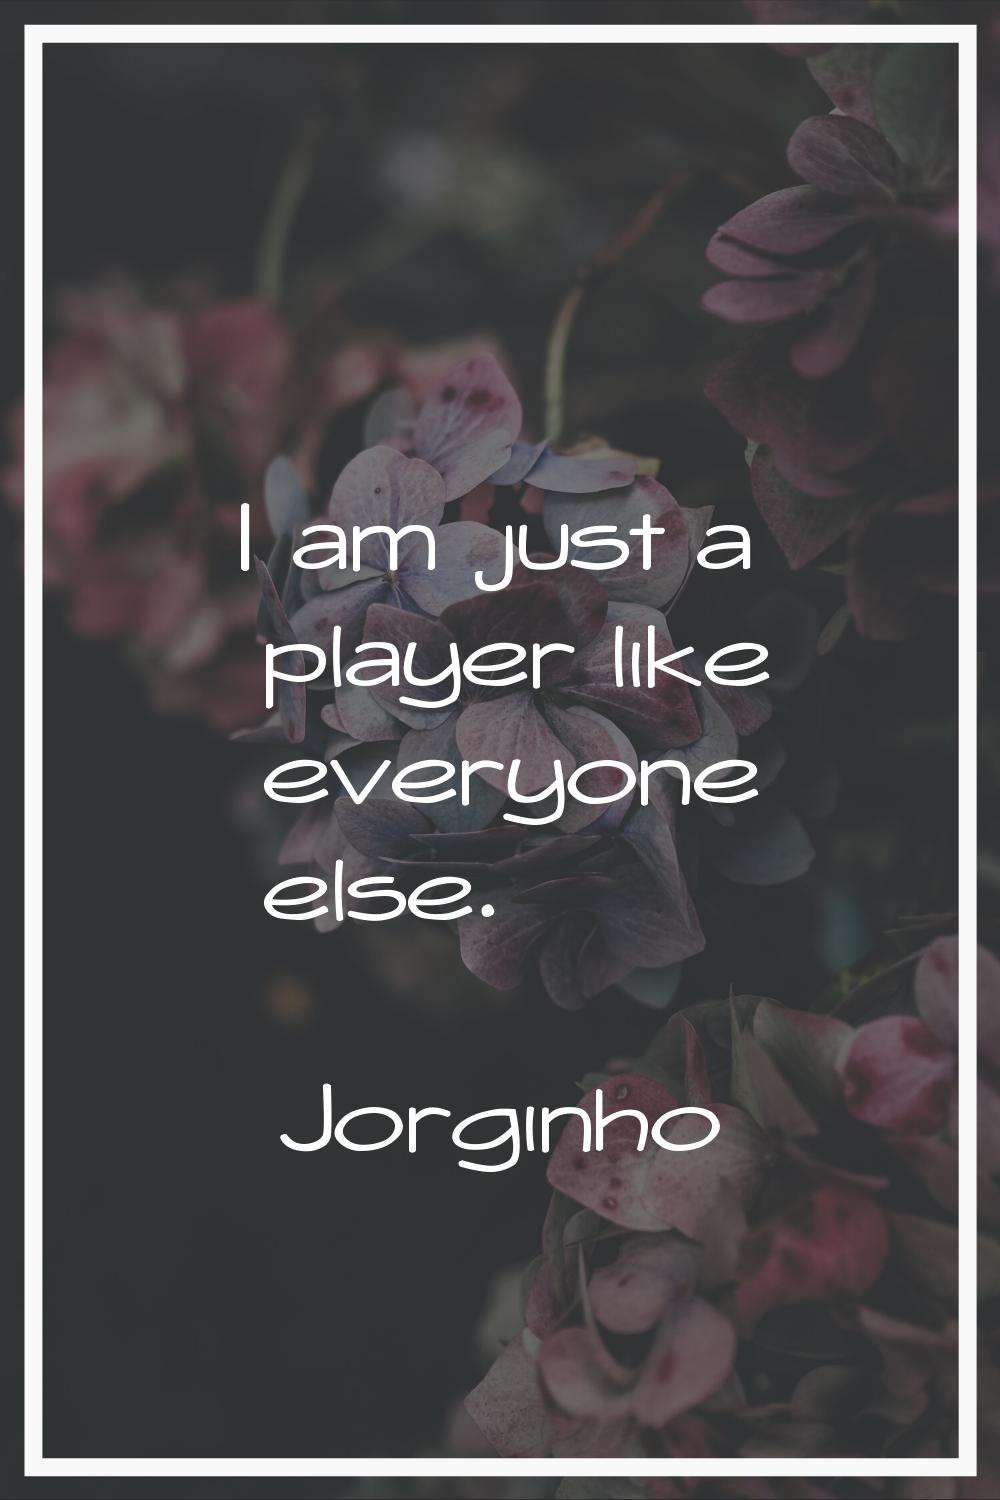 I am just a player like everyone else.